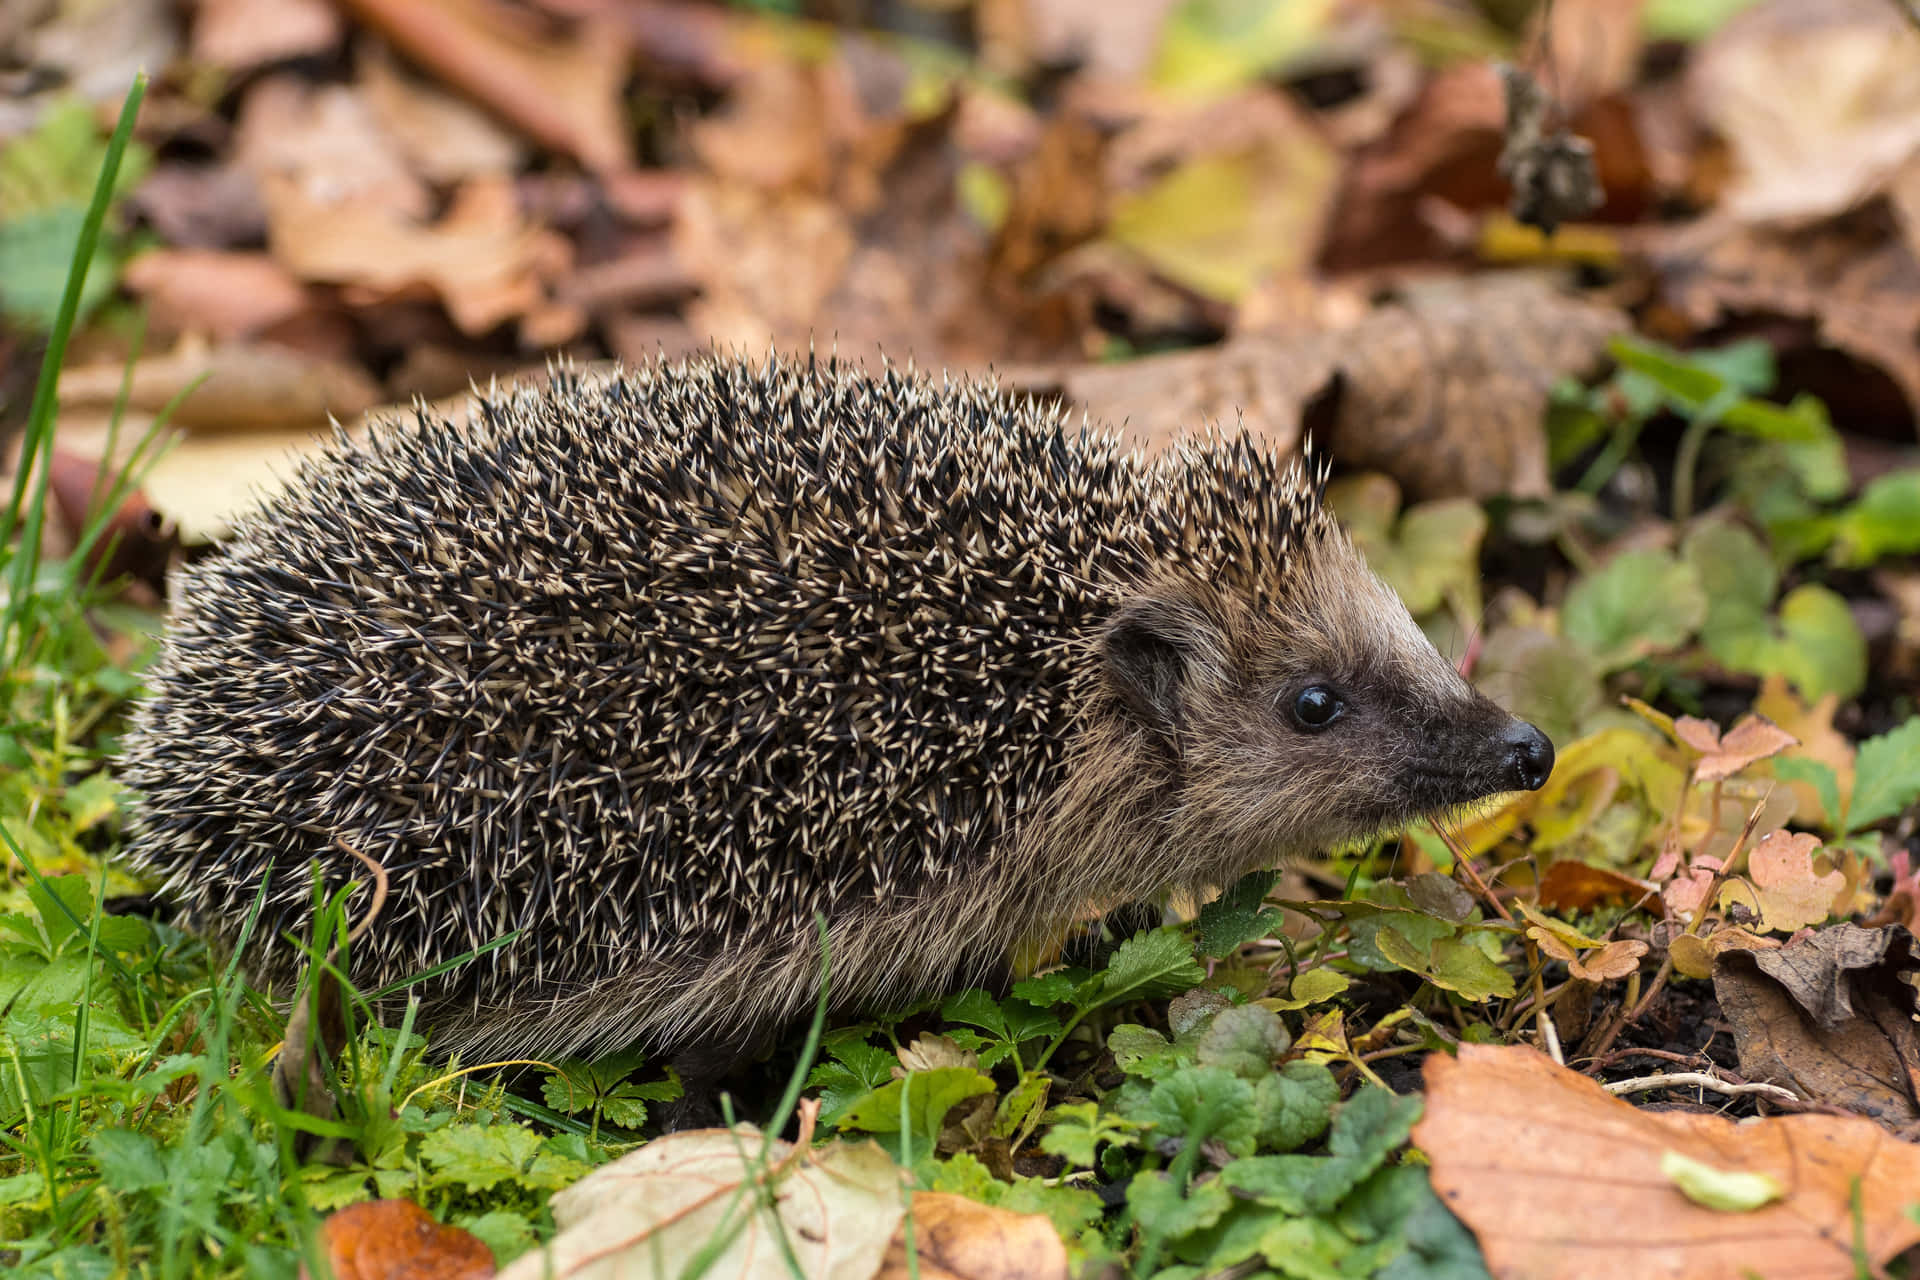 "Look how cunning this little hedgehog is!" Wallpaper